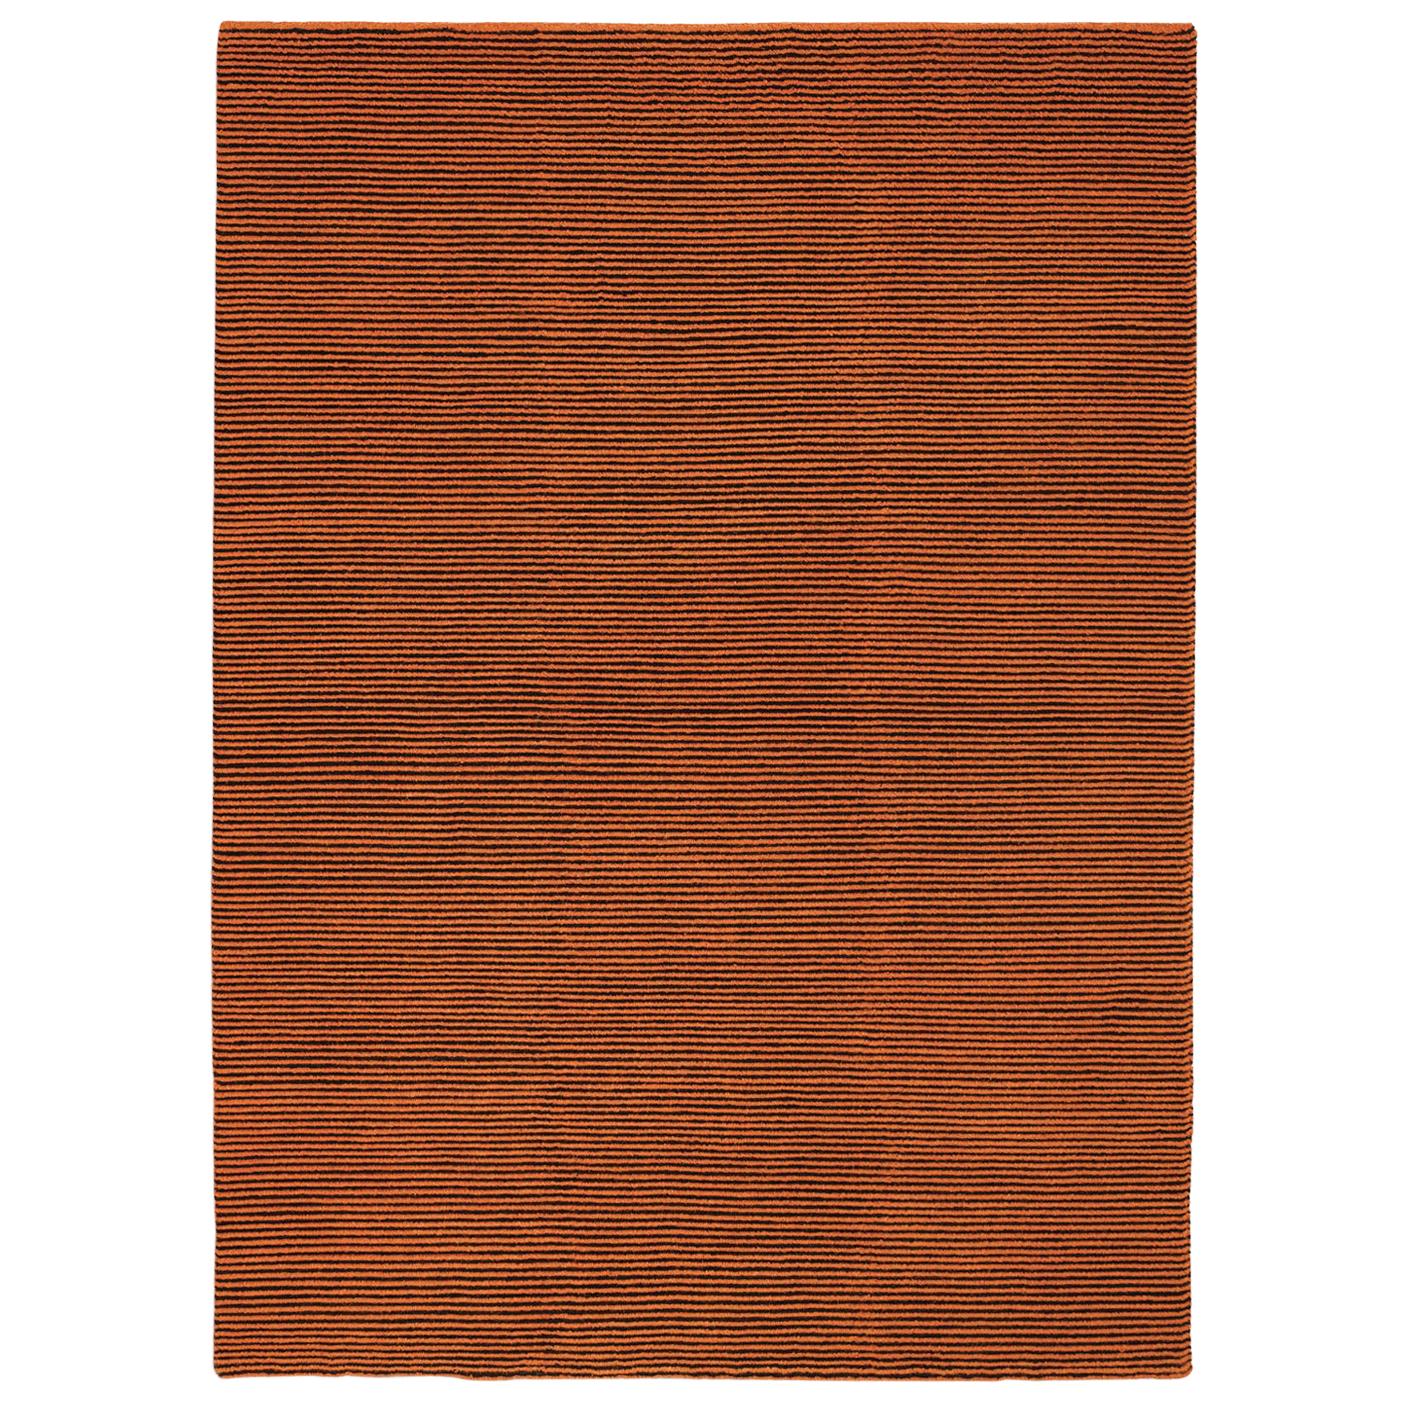 Contemporary Soft Natural Orange Pure Wool Rug by Deanna Comellini 170x240 cm